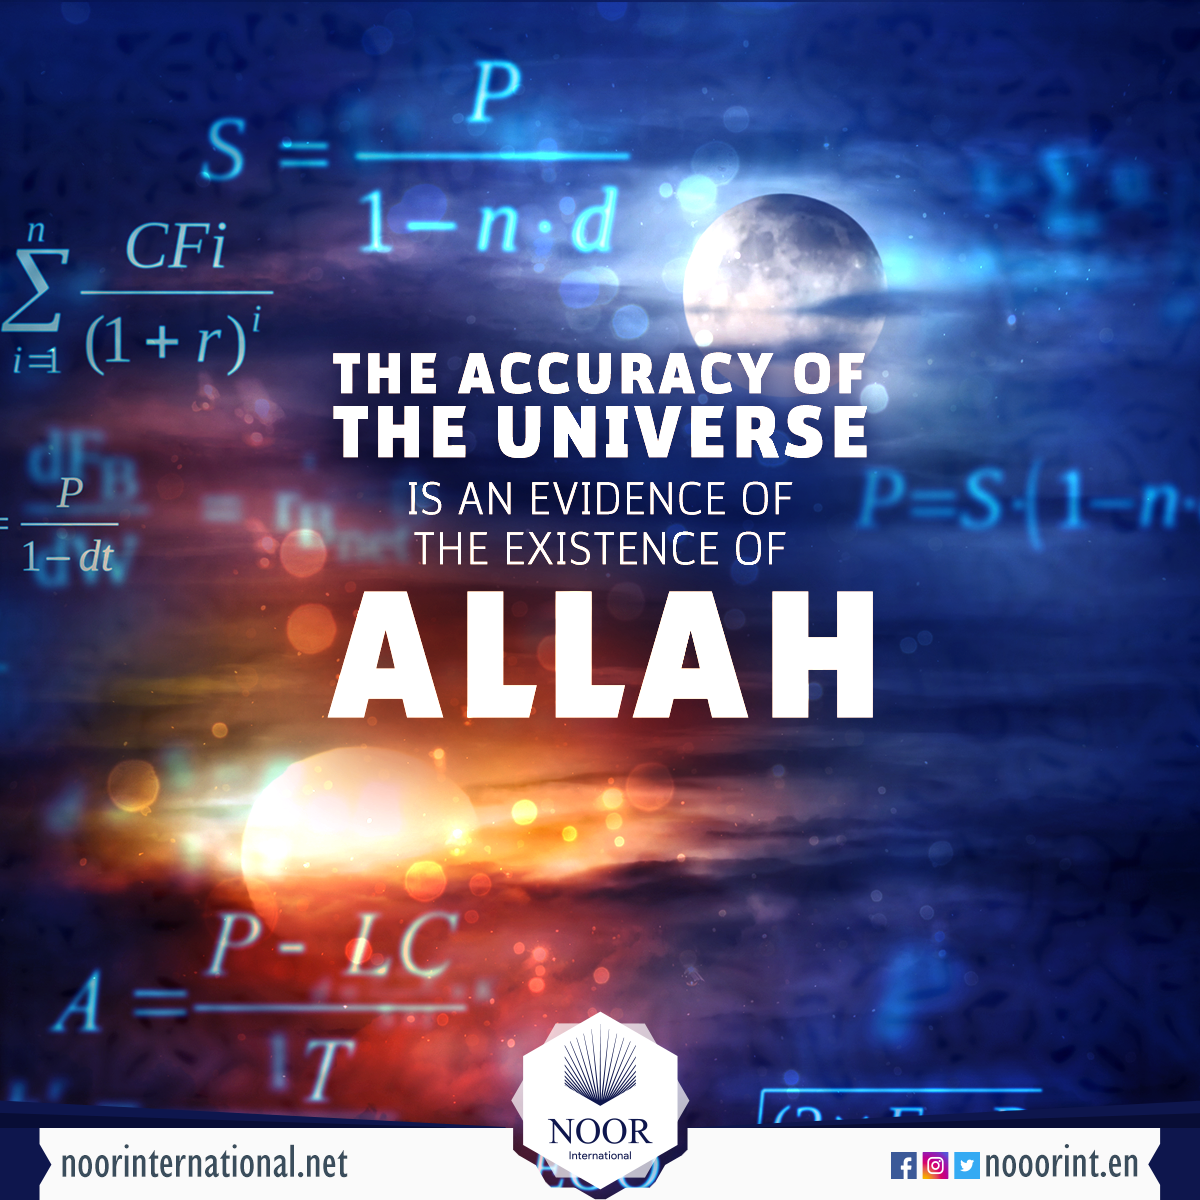 The accuracy of the universe is an evidence of the existence of Allah